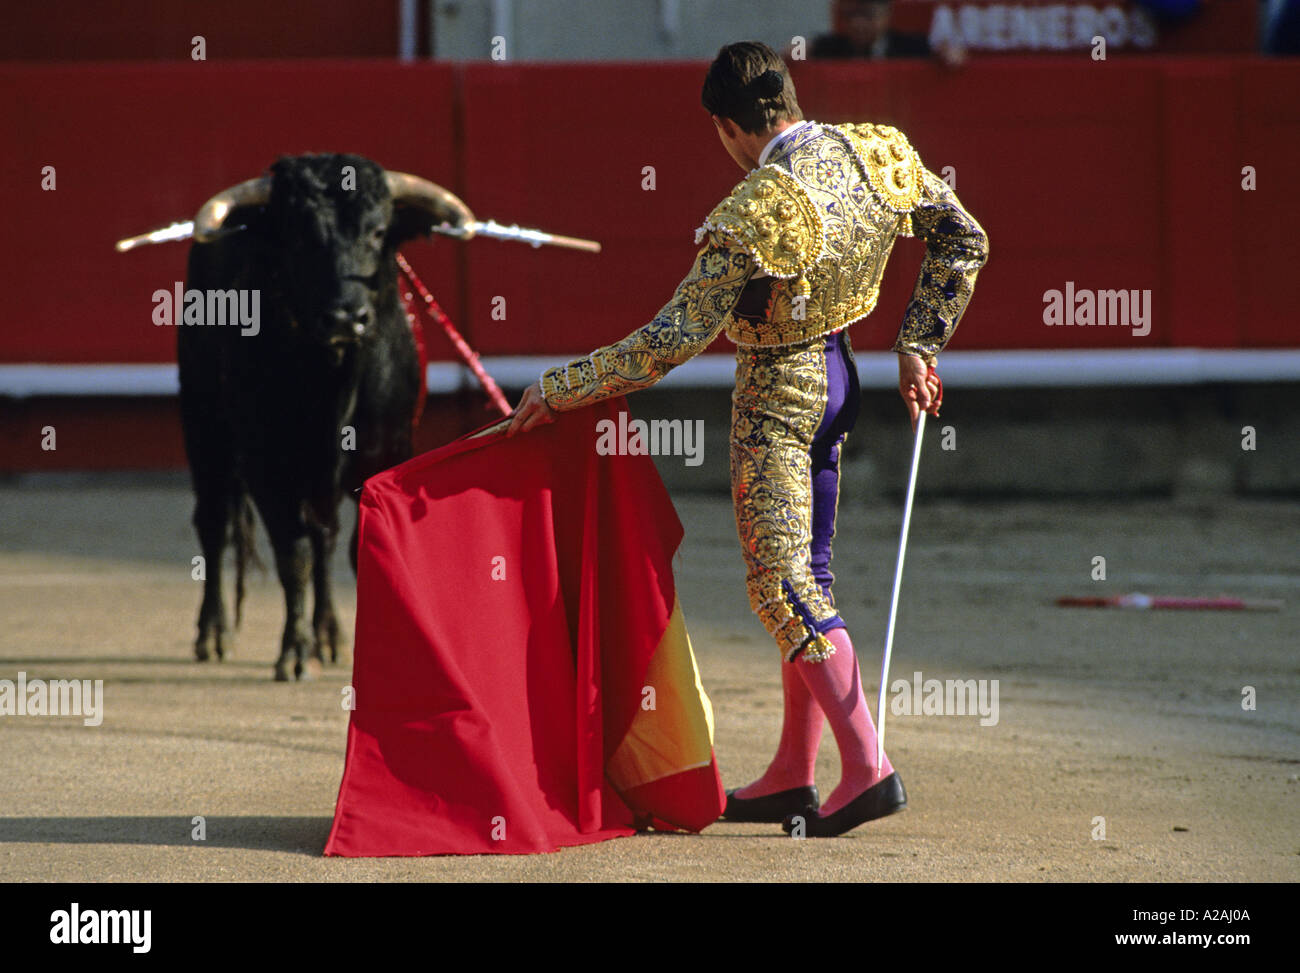 A Matador Attempts To Provoke The Bull With His Red Cape During A Bullfight In Barcelona Spain Stock Photo Alamy